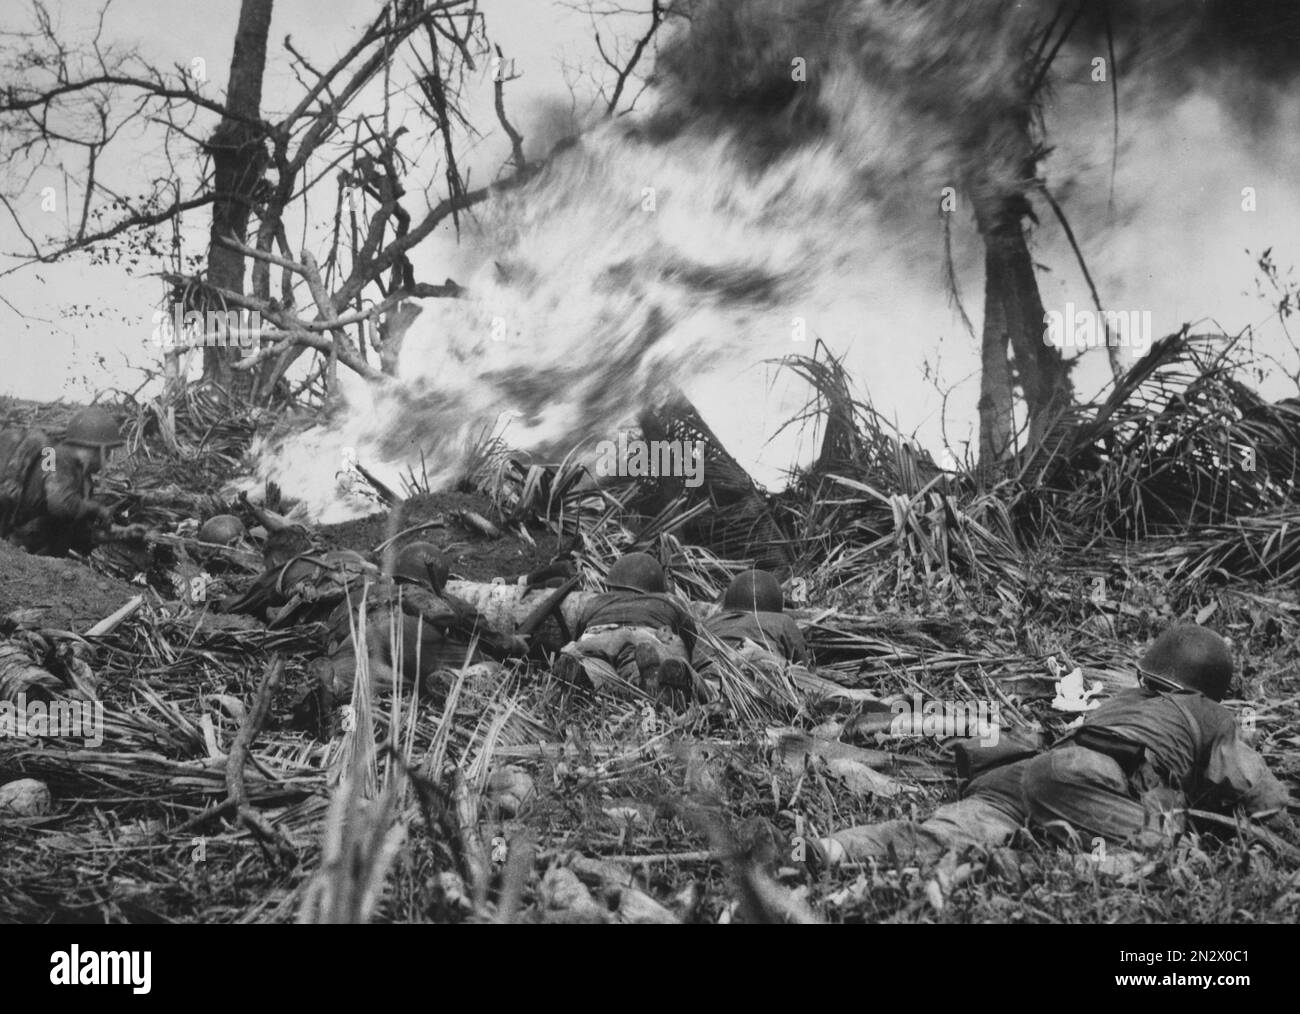 GUAM, MARIANA ISLANDS - August / September 1944 - US Marines use a flamethrower on a Japanese bunker during the Second Battle of Guam in the Mariana I Stock Photo